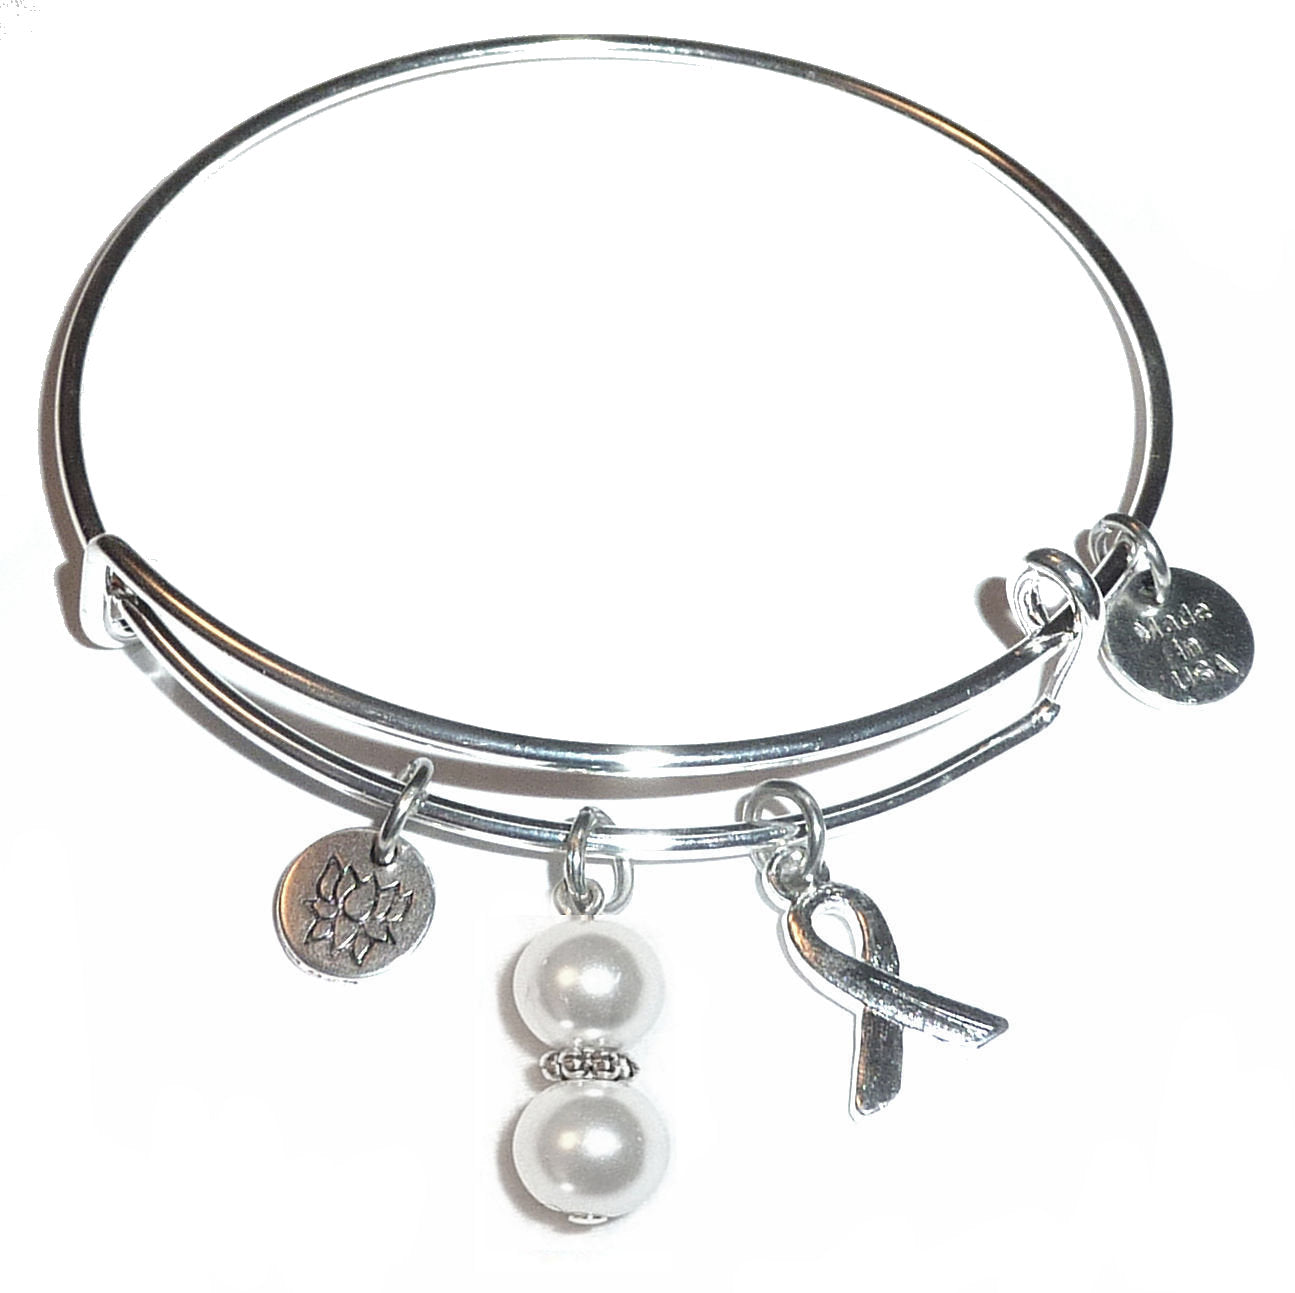 White Pearl (Lung Cancer) Hope for the Cure Bangle Bracelet -Expandable Wire Bracelet– Comes in a gift box